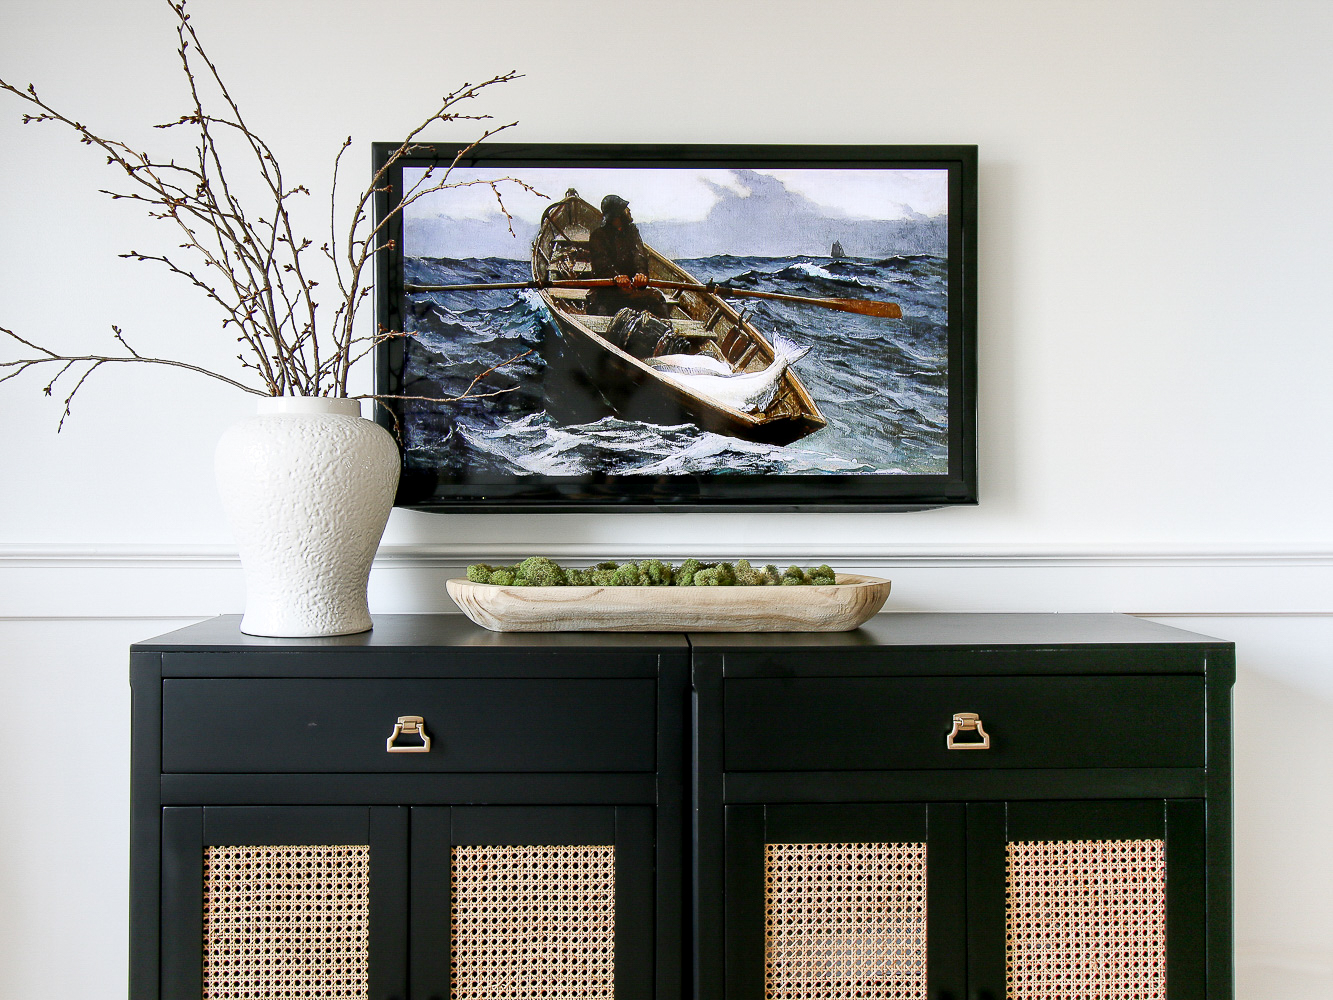 Tv mounted on wall above a console table, styled with white case and dough bowll